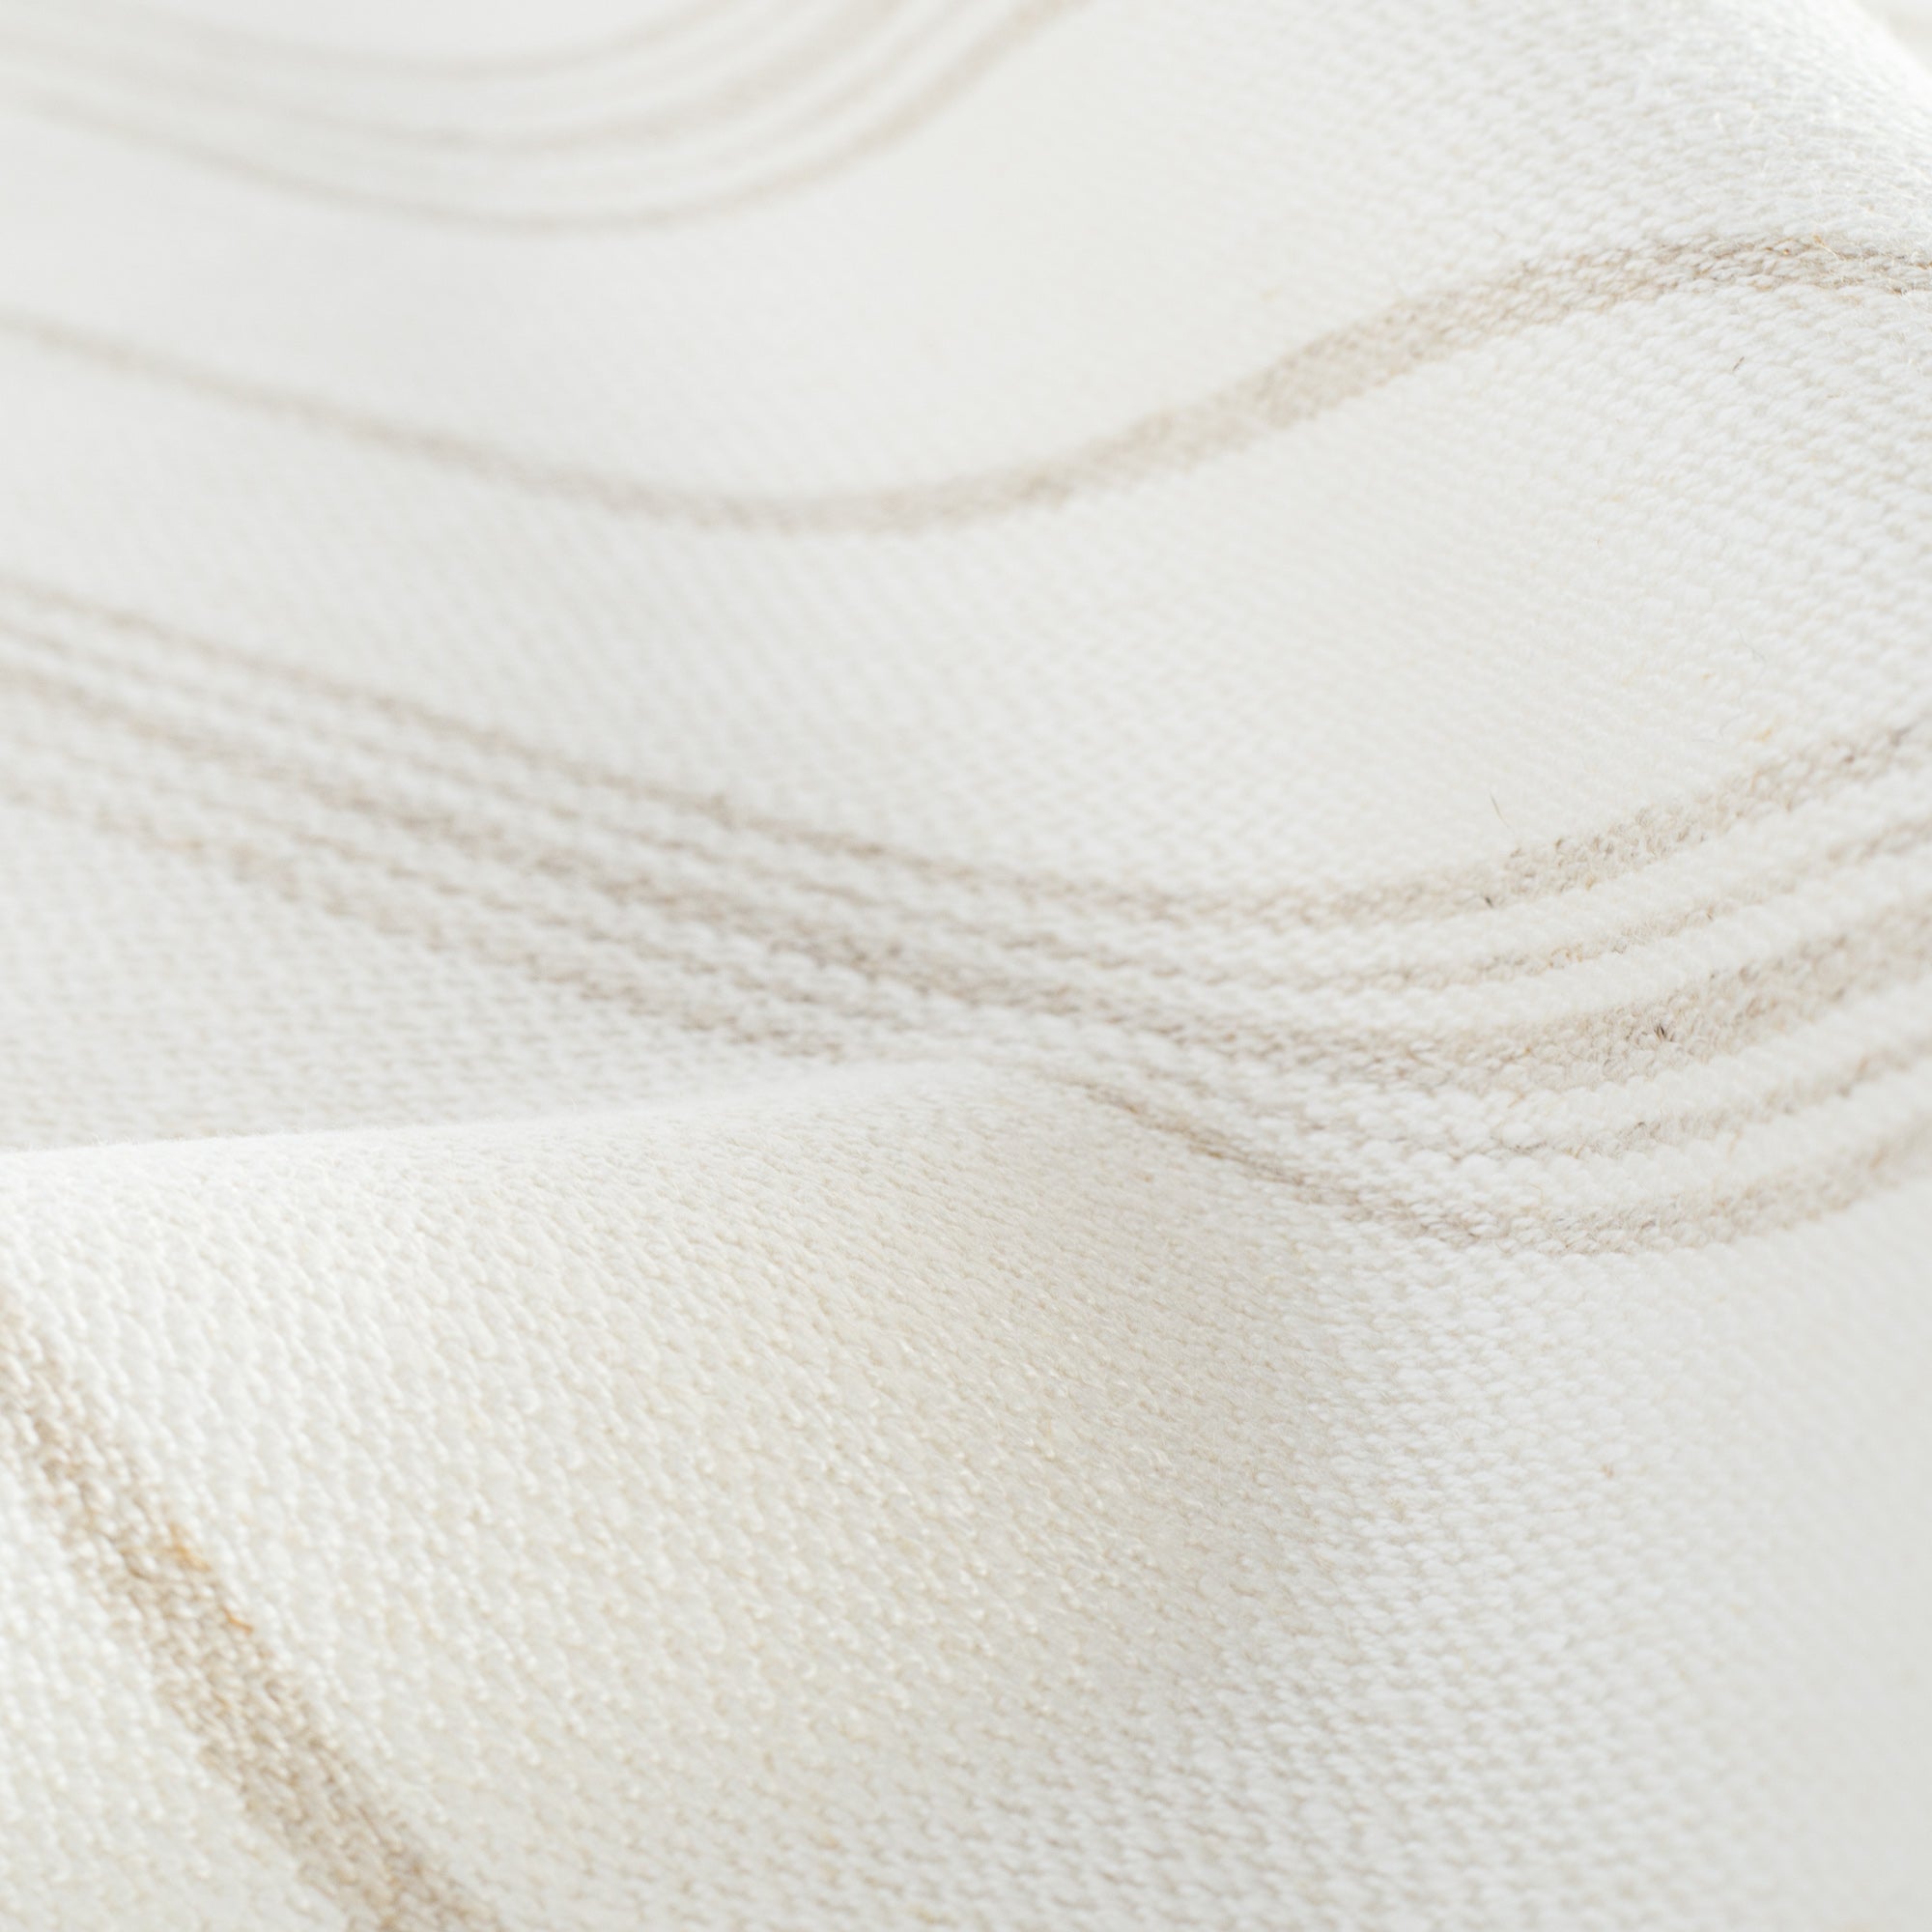 a white and beige vertical striped linen blend fabric : close up view